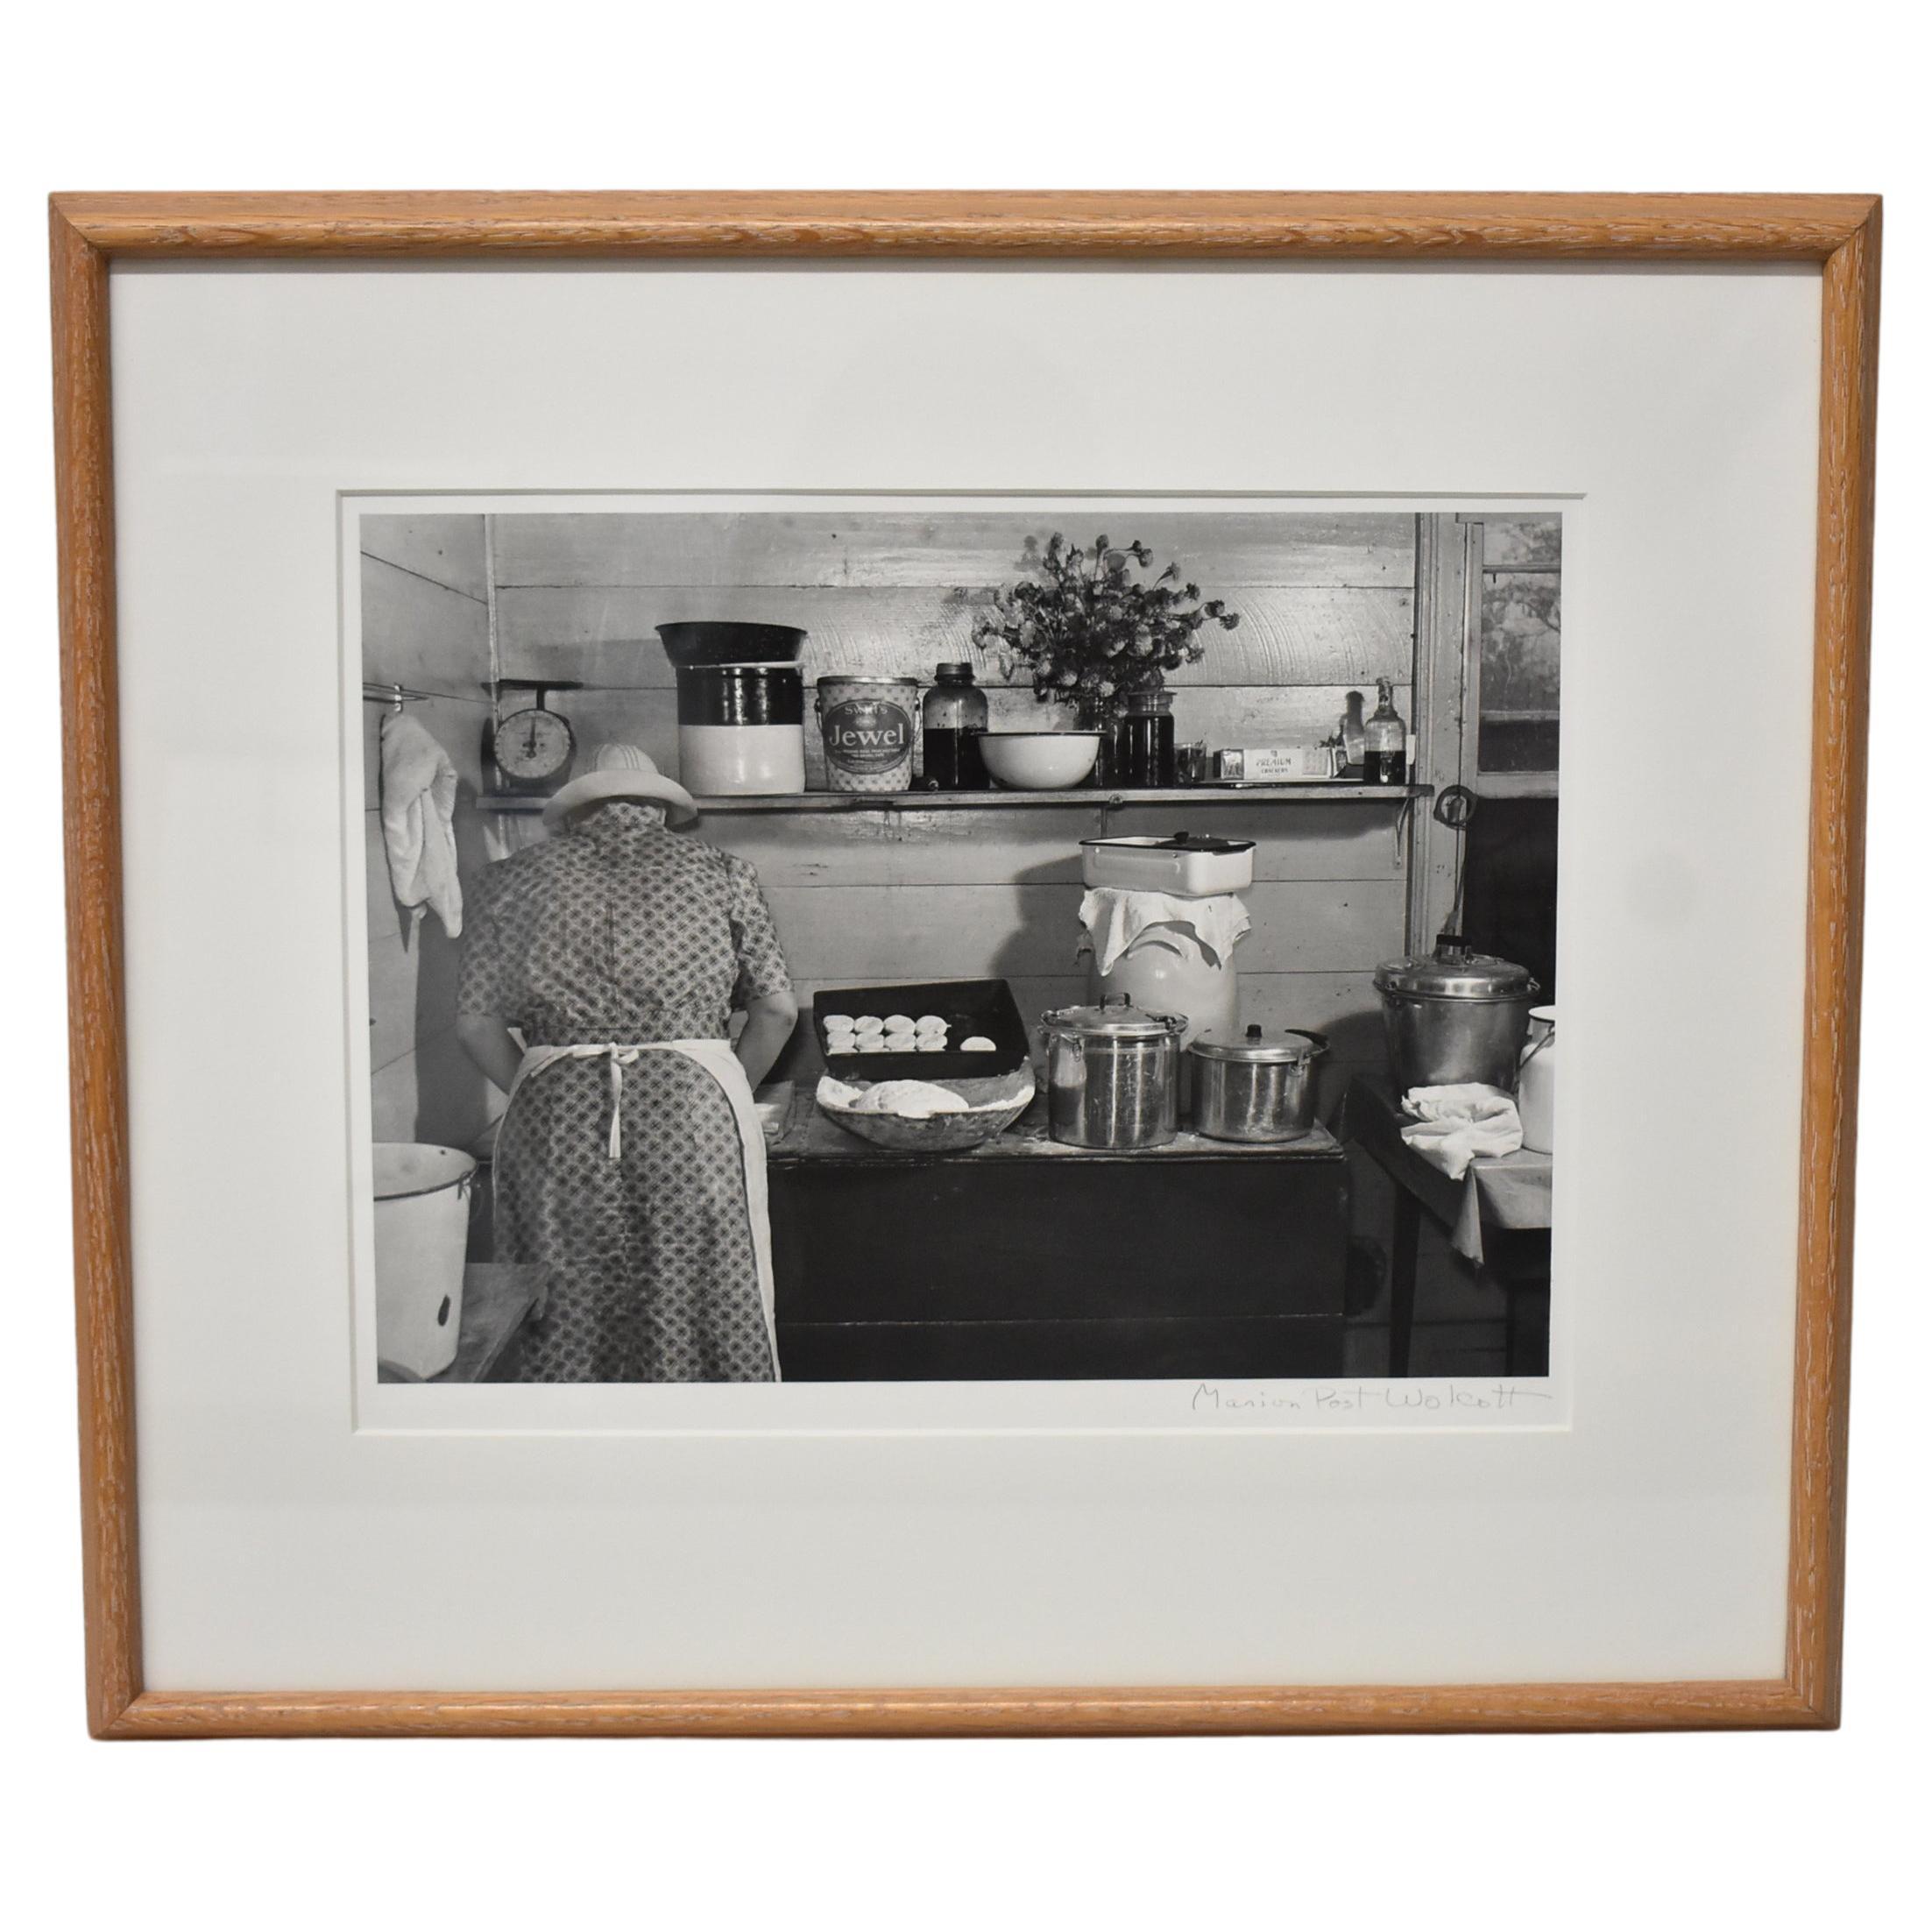 Marion Post Wolcott "Making Biscuits" Silver Gelatin Black and White Photograph For Sale